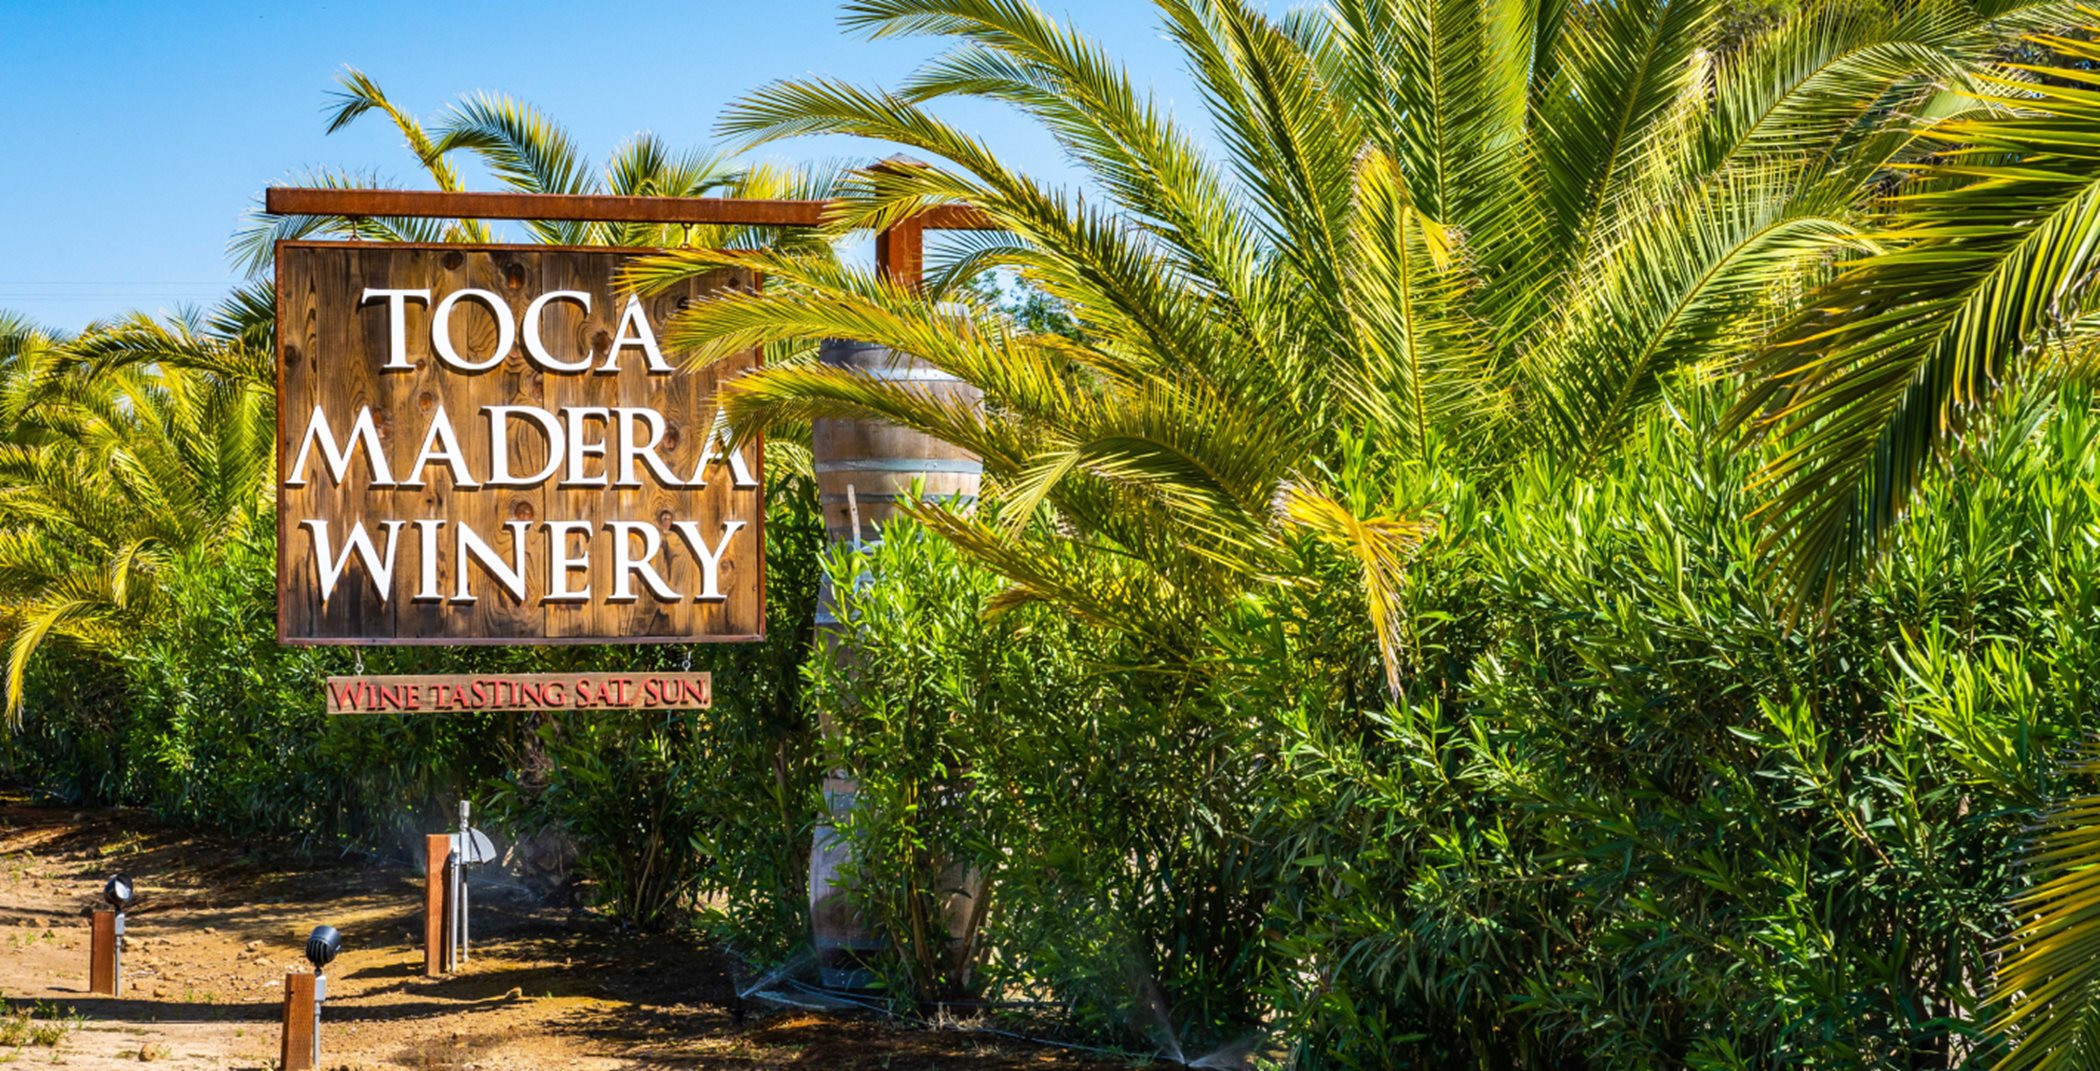 Toca Madera Wine Trail entrance sign